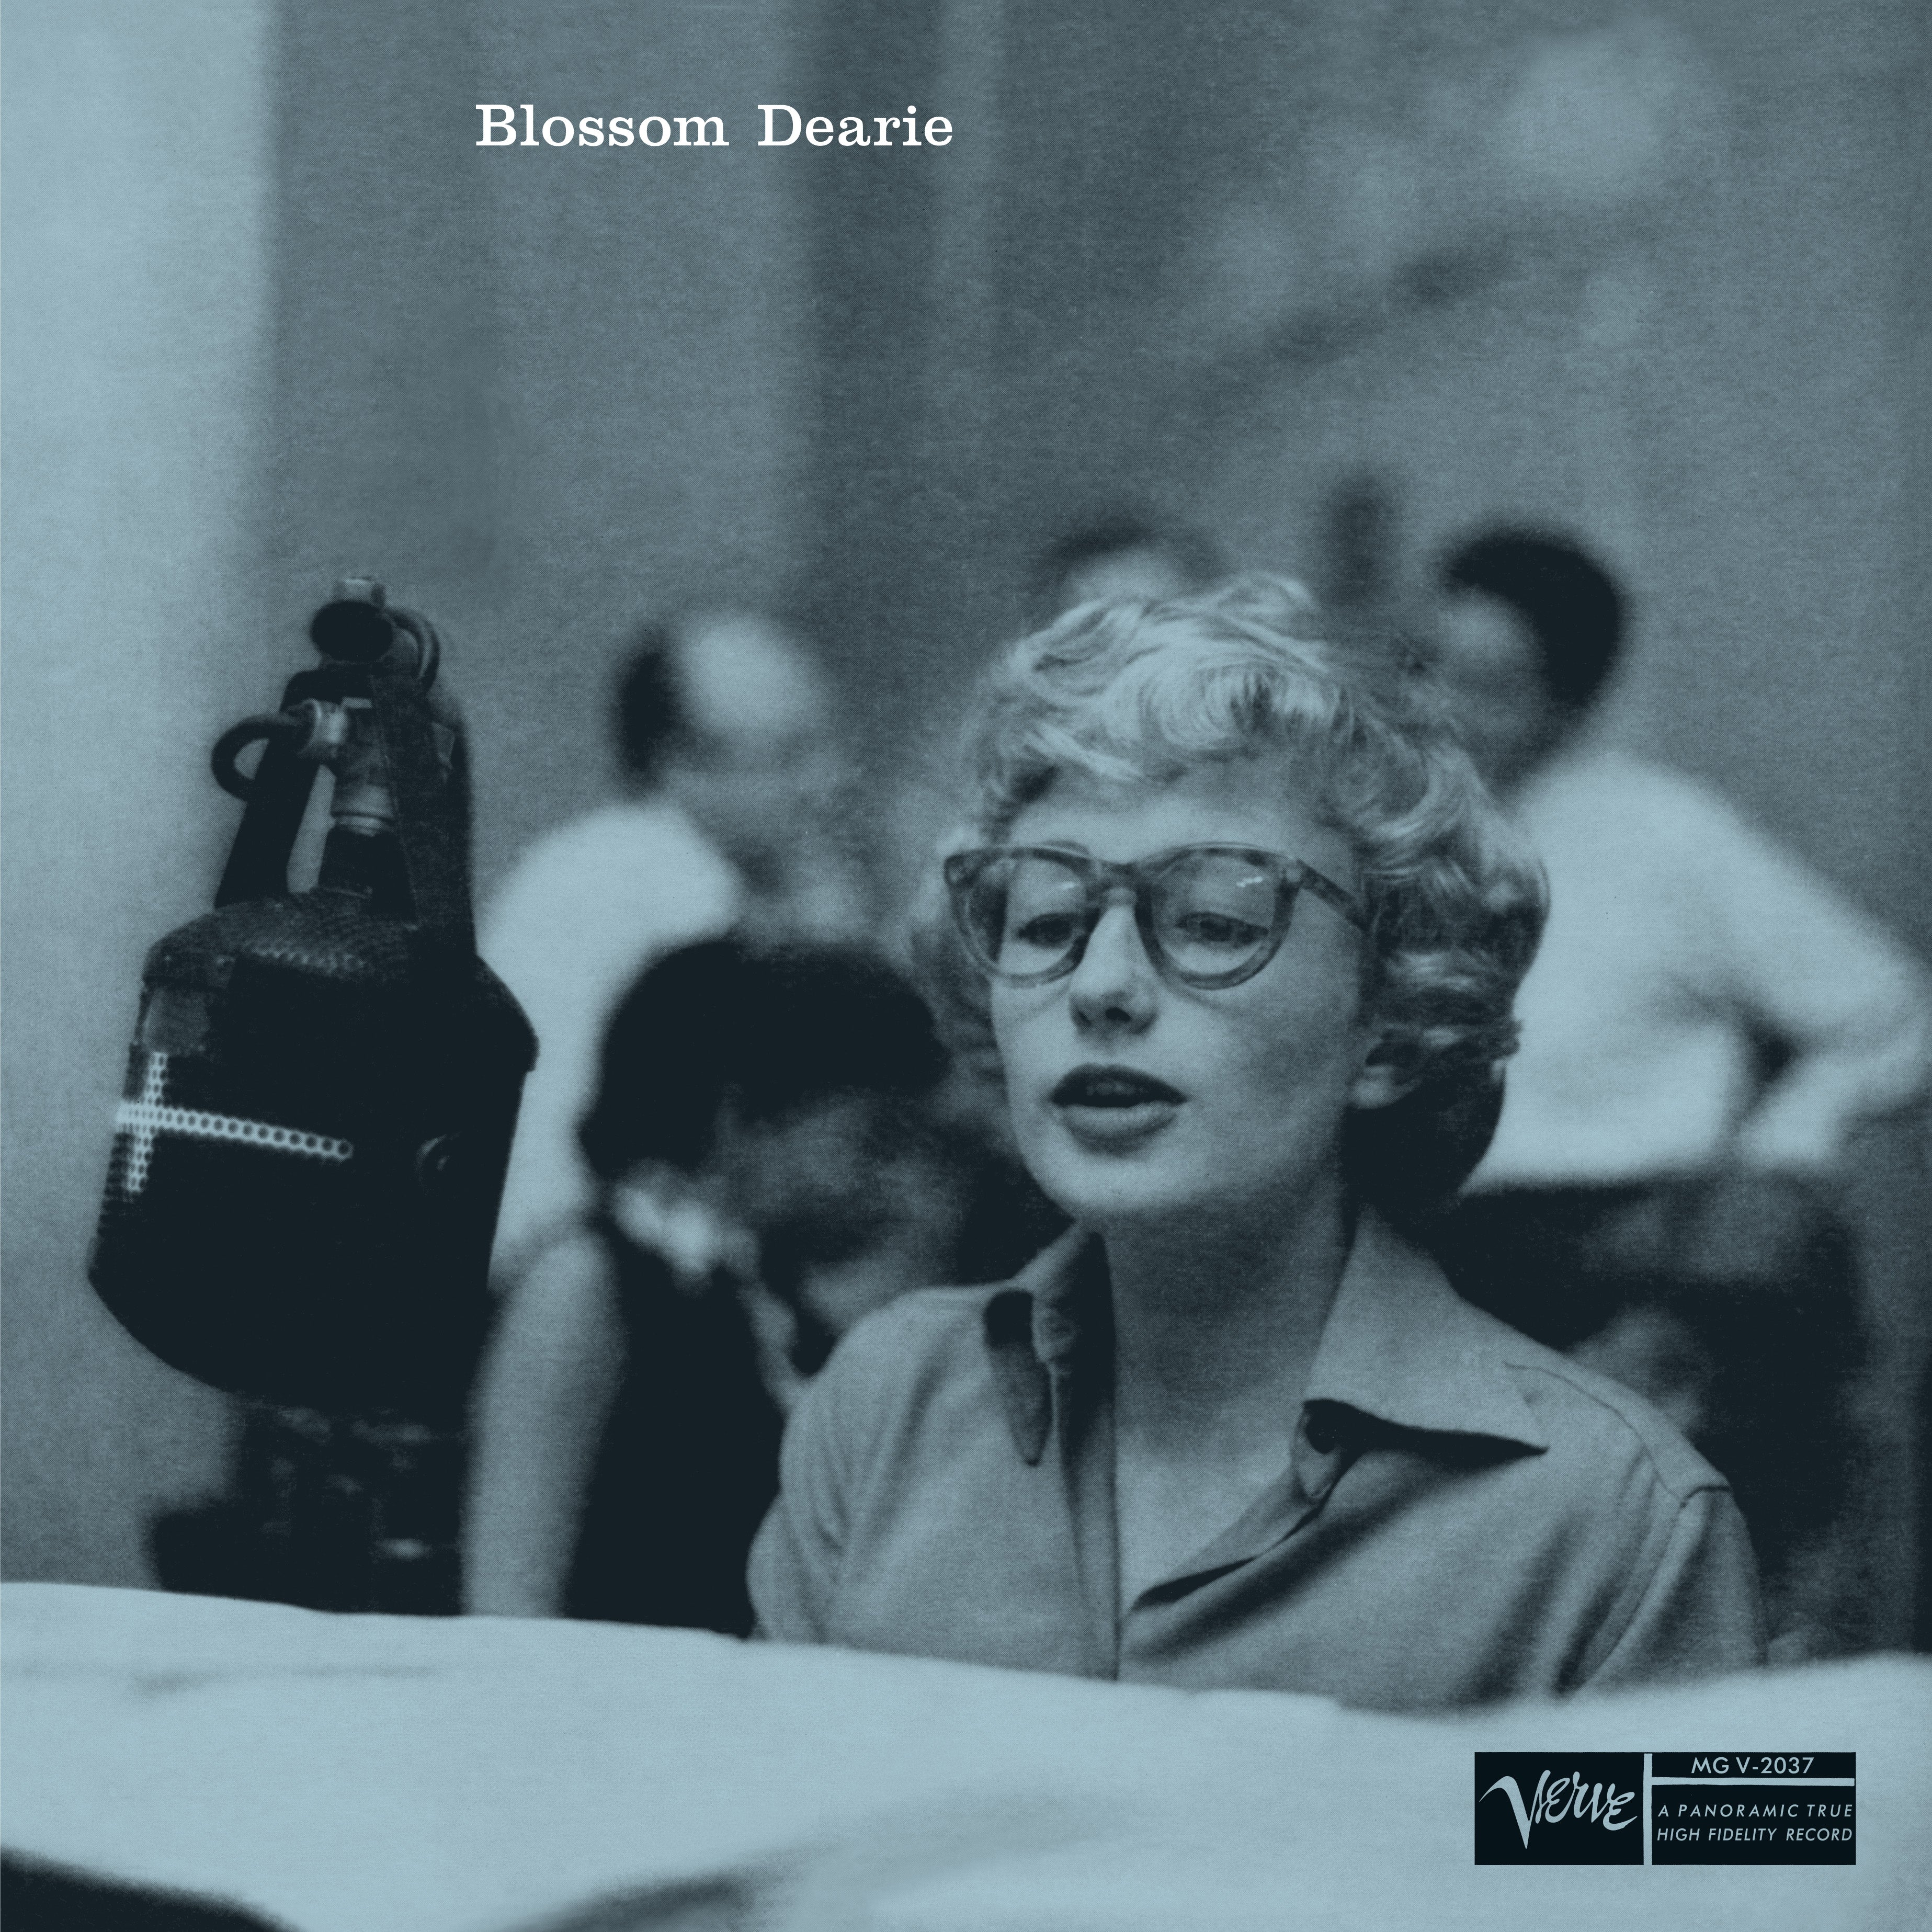 Blossom Dearie - Blossom Dearie (Verve By Request): Vinyl LP